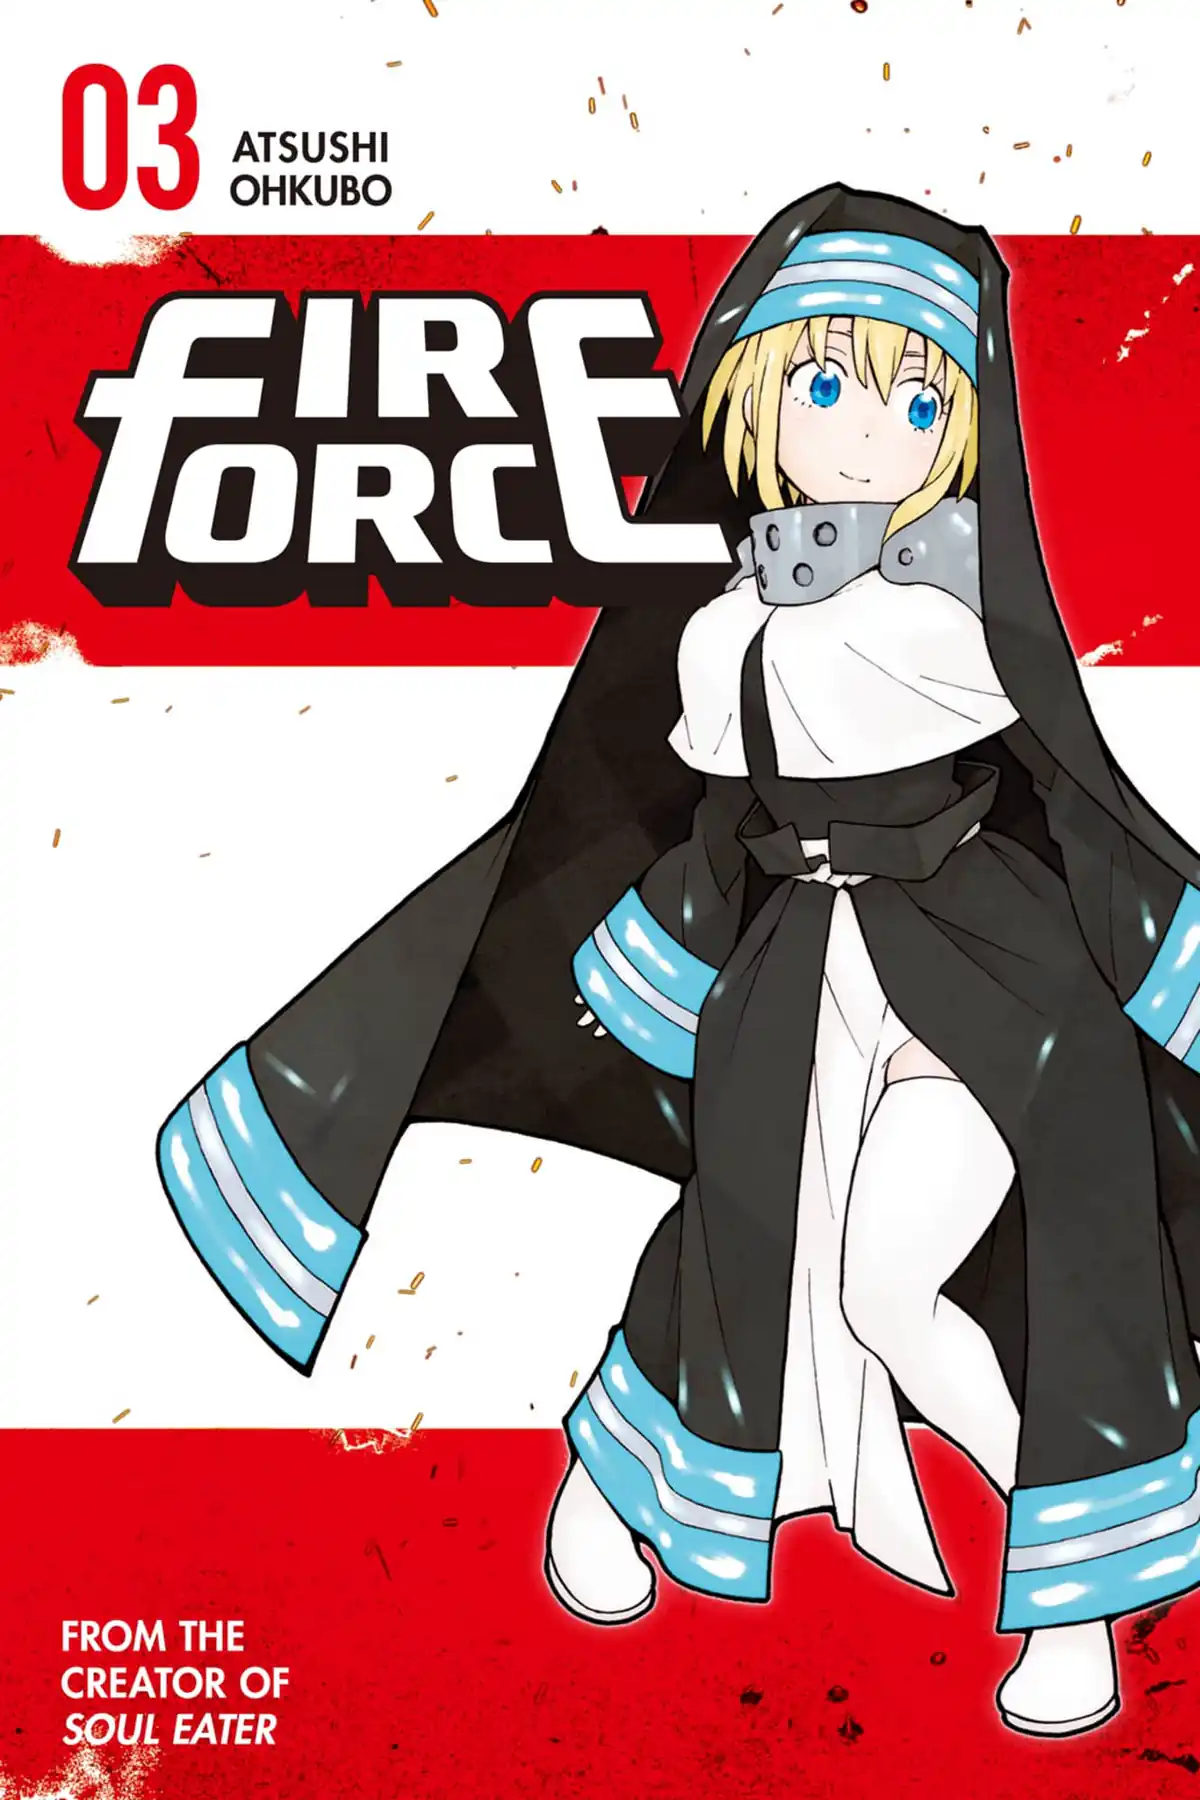 From the latest Chapter of Fire Force 🔸𝙰𝚗𝚒𝚖𝚎 ꪮ𝘳 𝙼𝚊𝚗𝚐𝚊